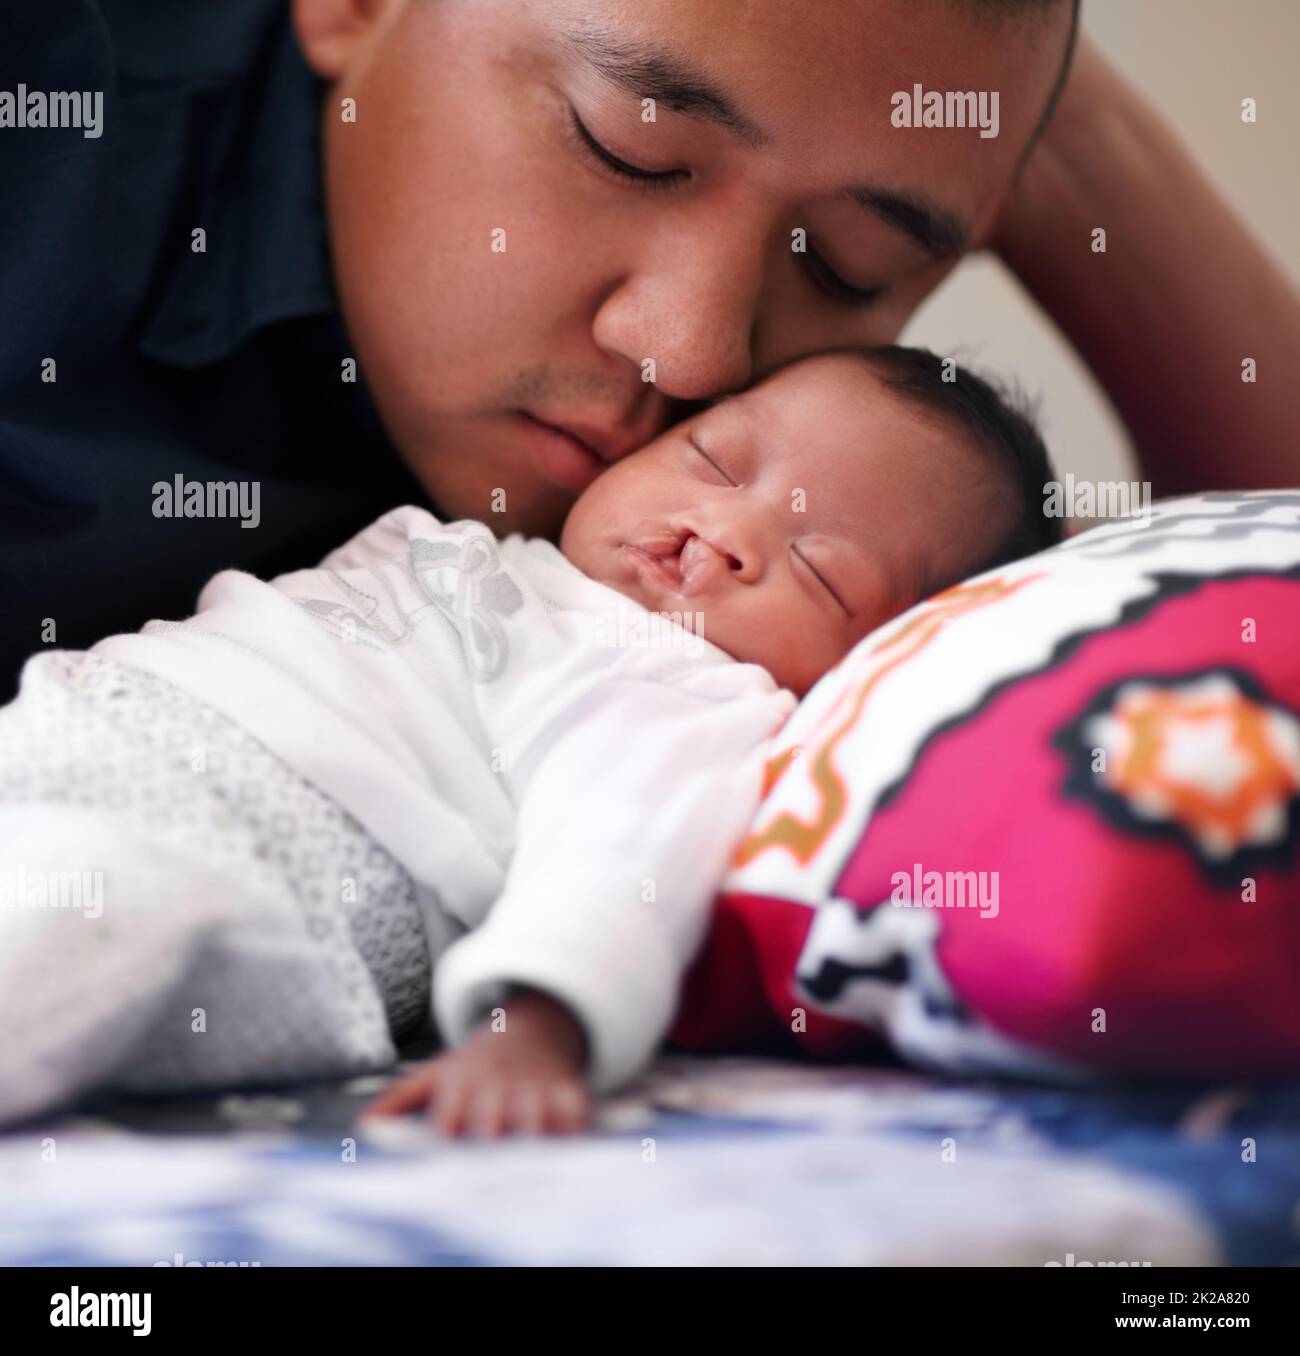 Under the loving gaze of his father. Shot of a young father bonding with his baby girl who has a cleft palate. Stock Photo